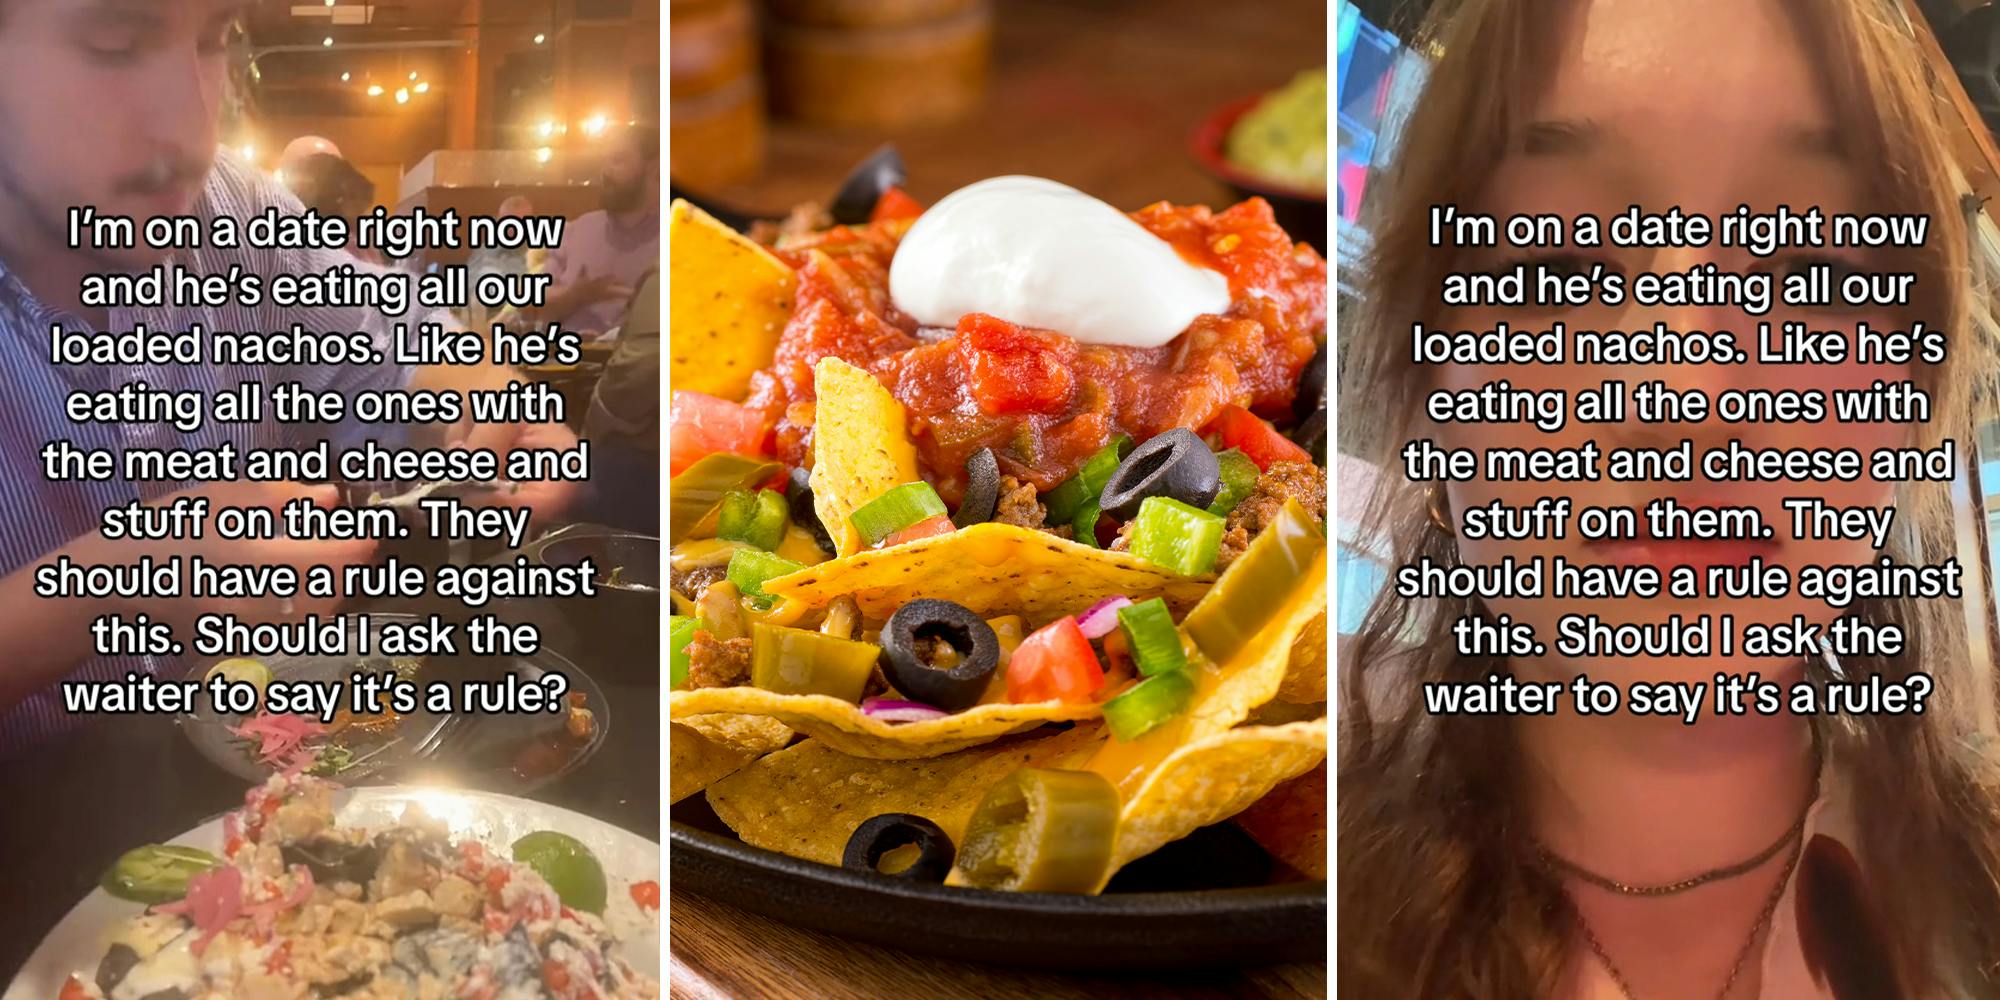 Man called out for aggressively eating all the loaded nachos on date